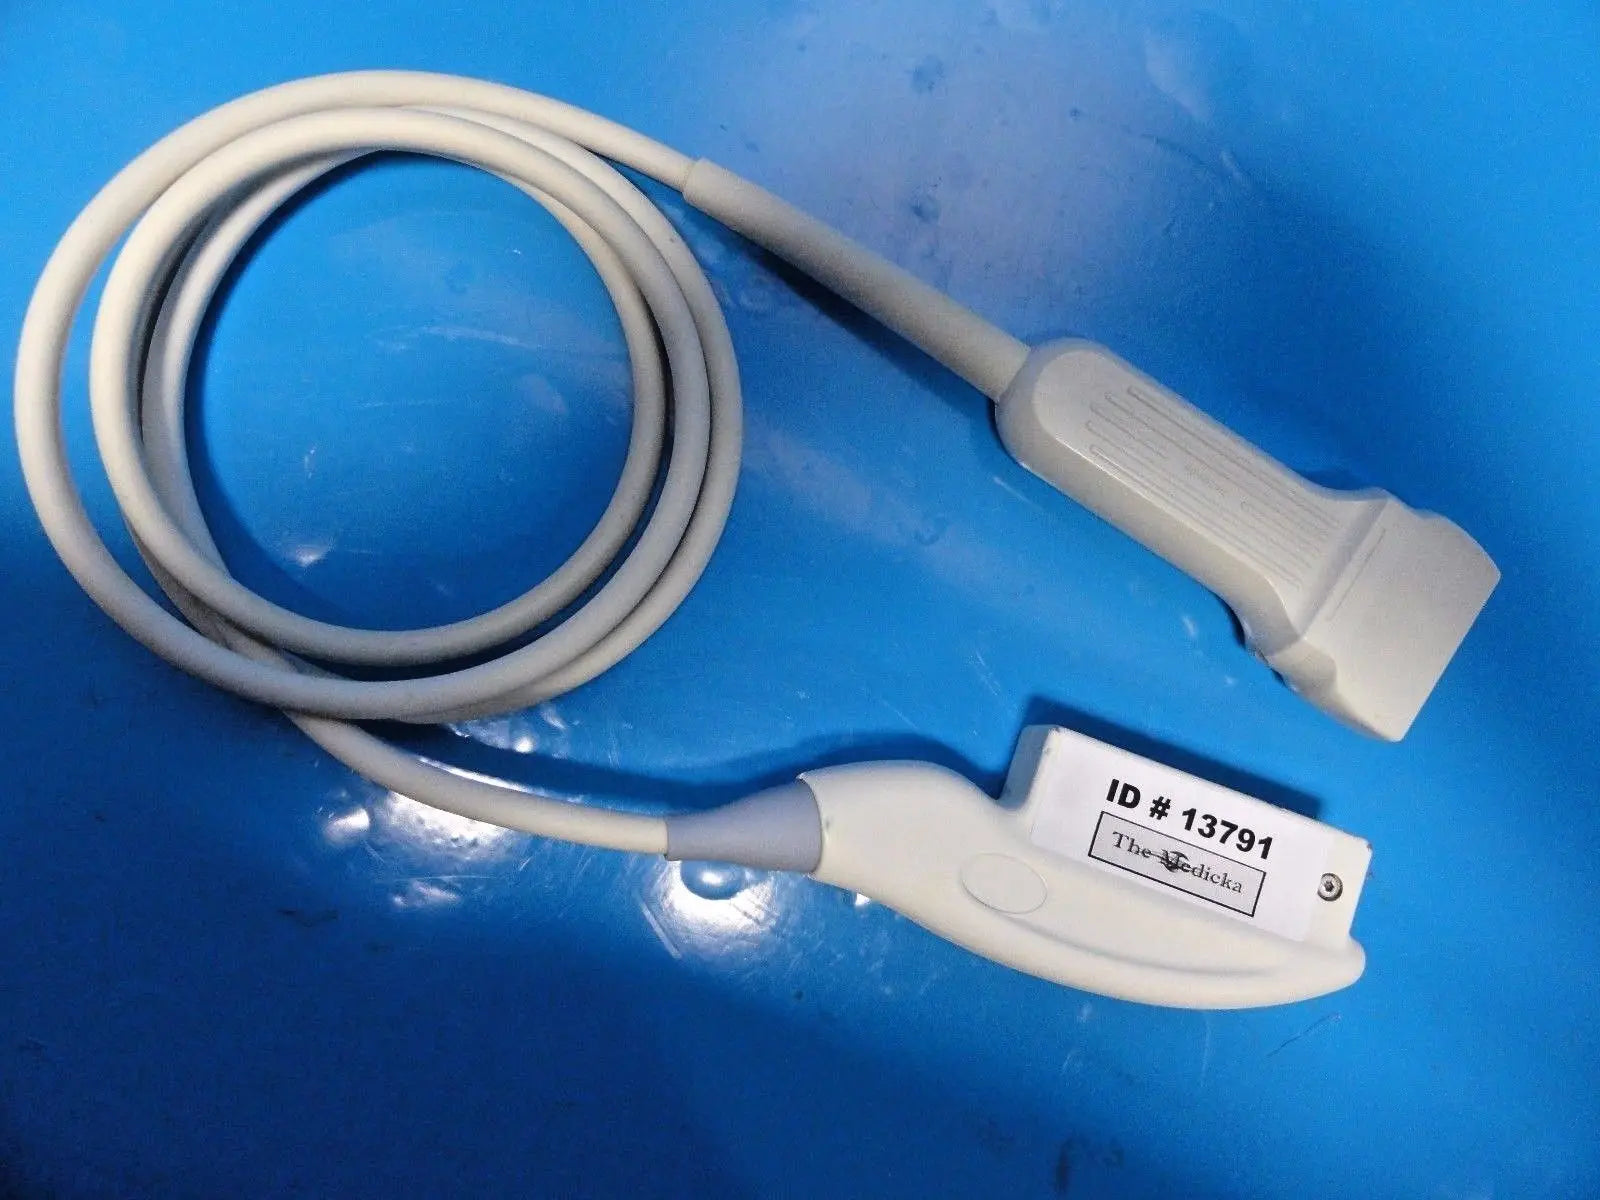 GE 10LB-RS P/N 2333890 Linear Array 7.0 MHz Transducer Ultrasound Probe ~13791 DIAGNOSTIC ULTRASOUND MACHINES FOR SALE